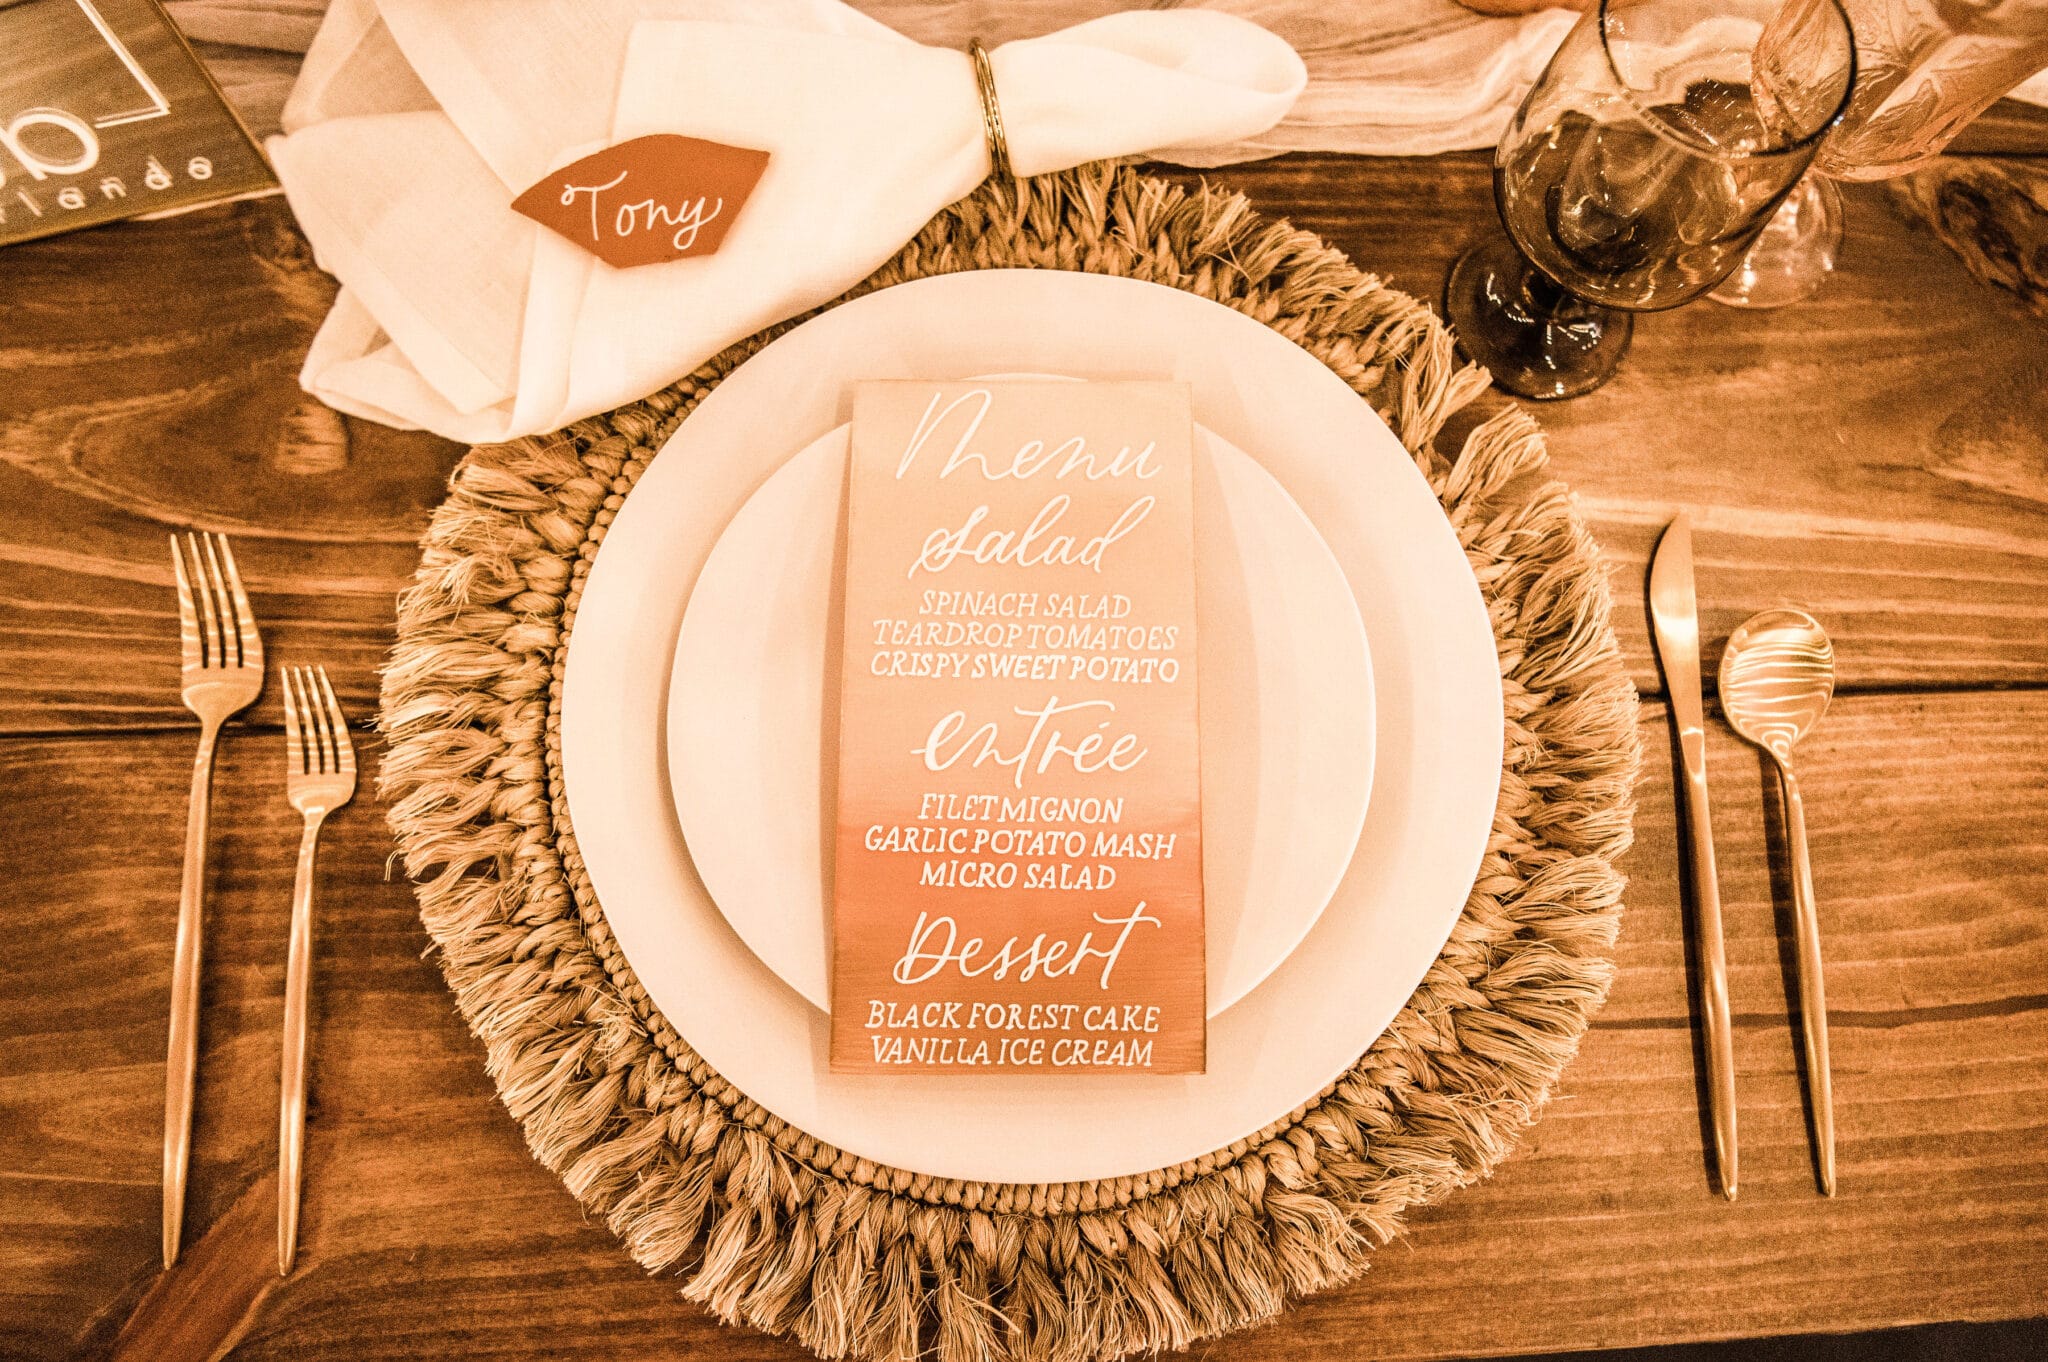 Bare Lettered Design place setting and menu